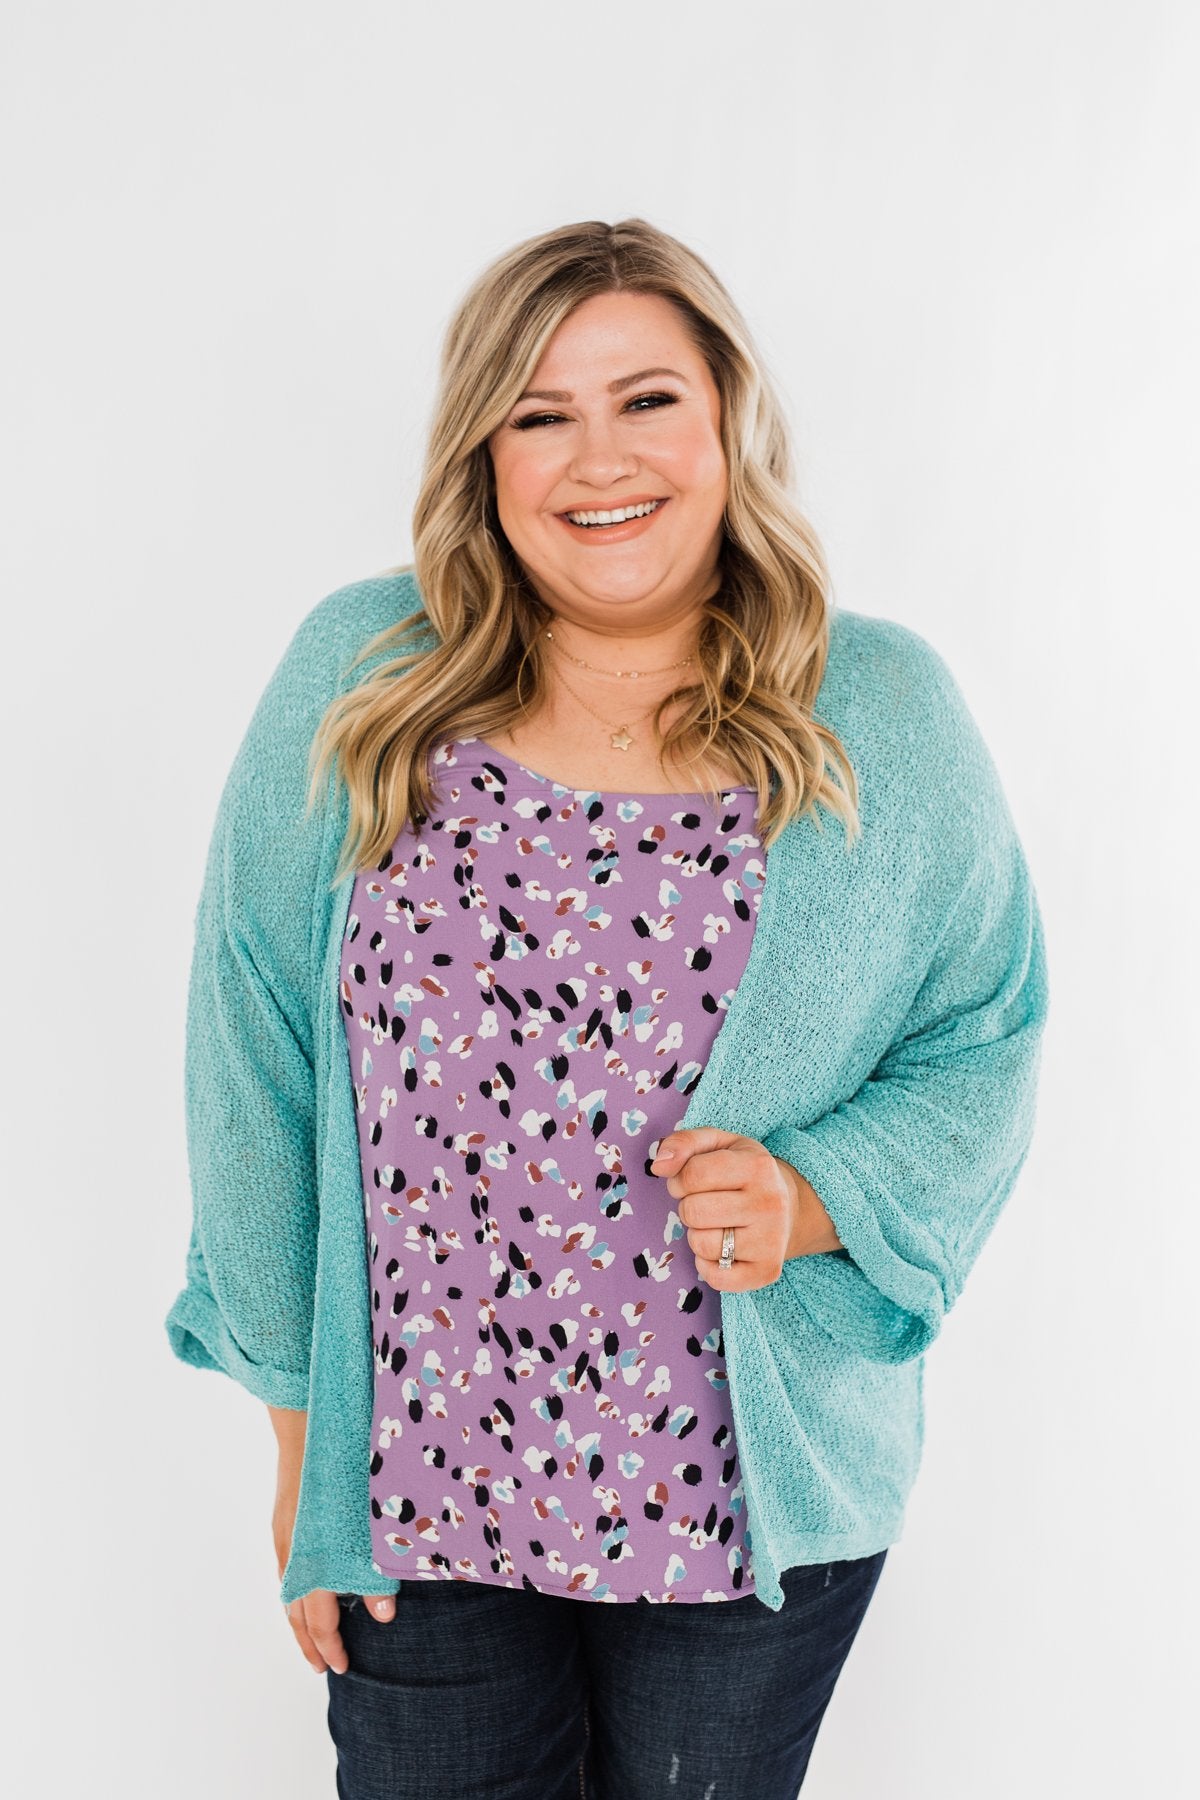 Waiting On A Miracle Knitted Cardigan- Deep Aqua Blue